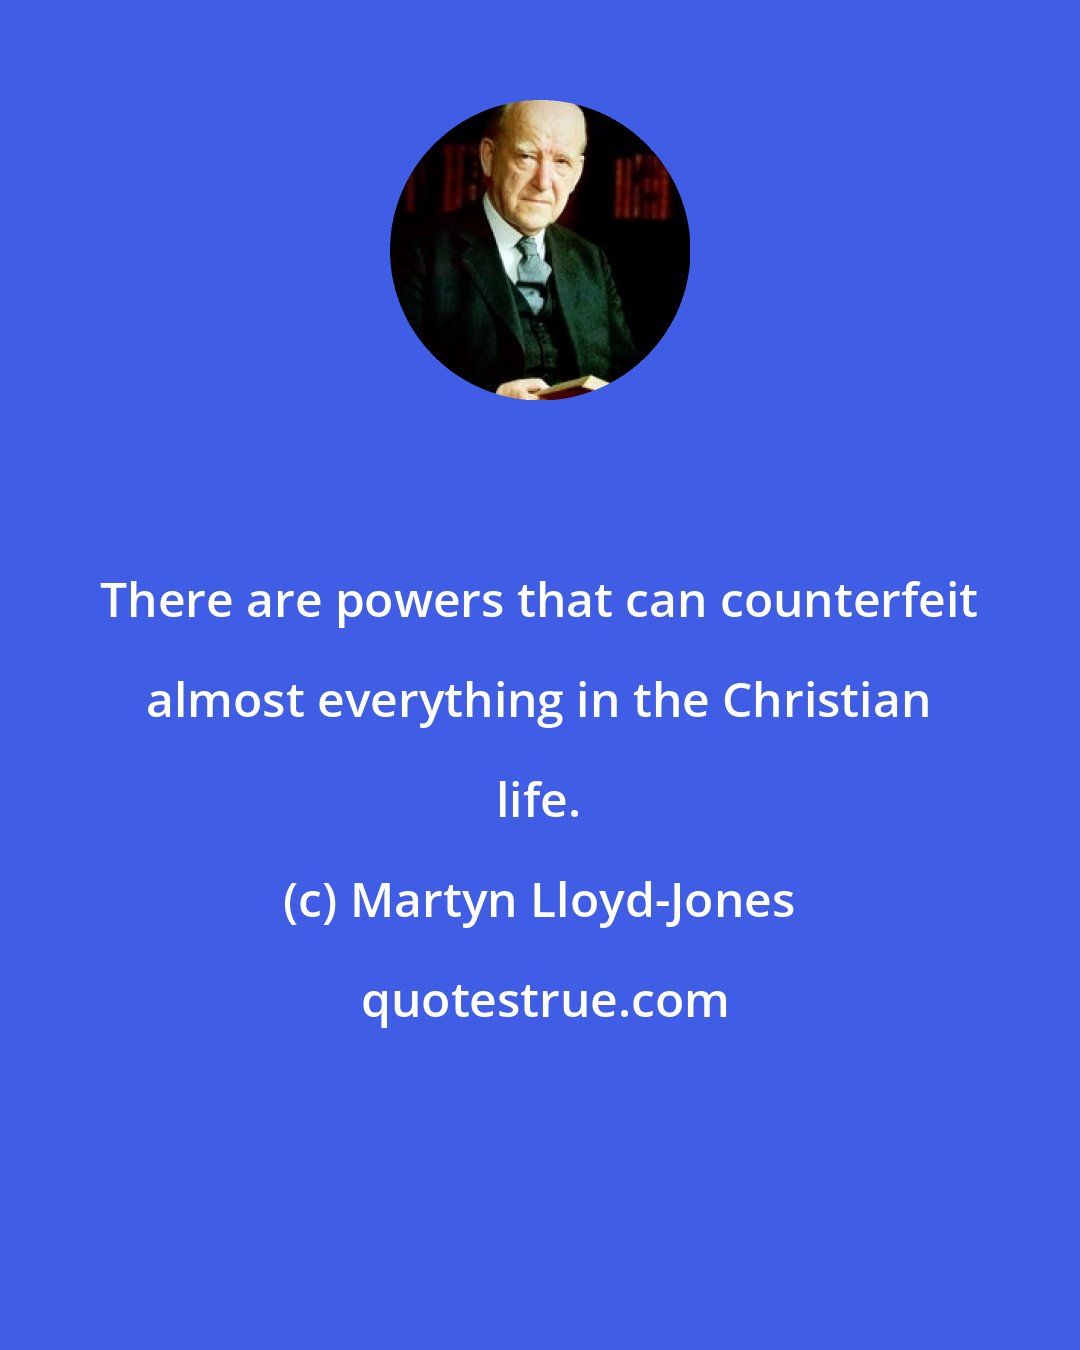 Martyn Lloyd-Jones: There are powers that can counterfeit almost everything in the Christian life.